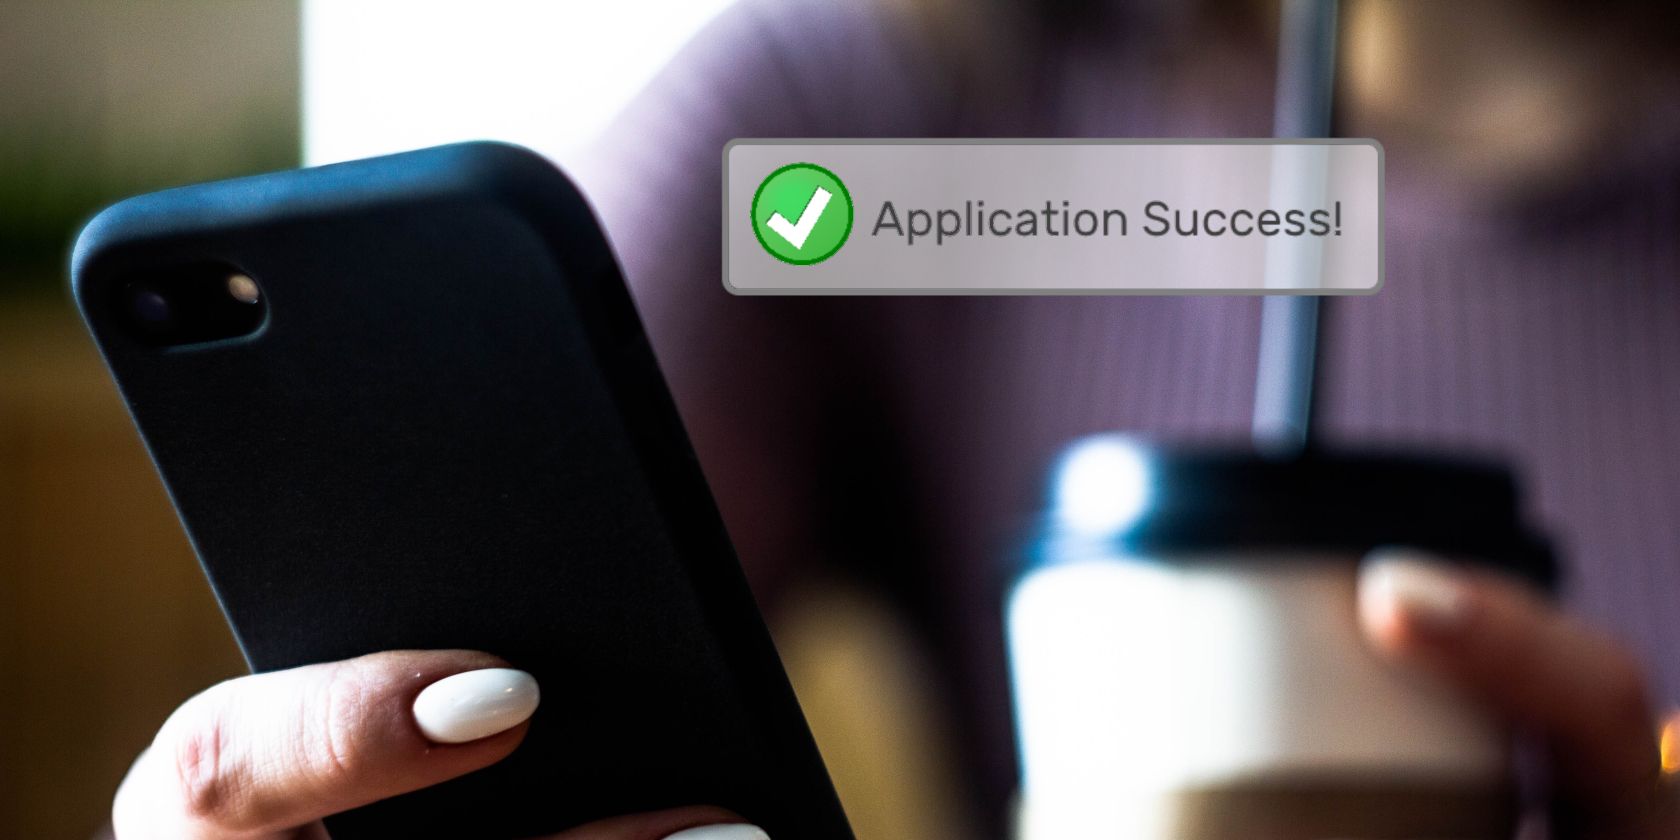 An Application Success notification from a smartphone